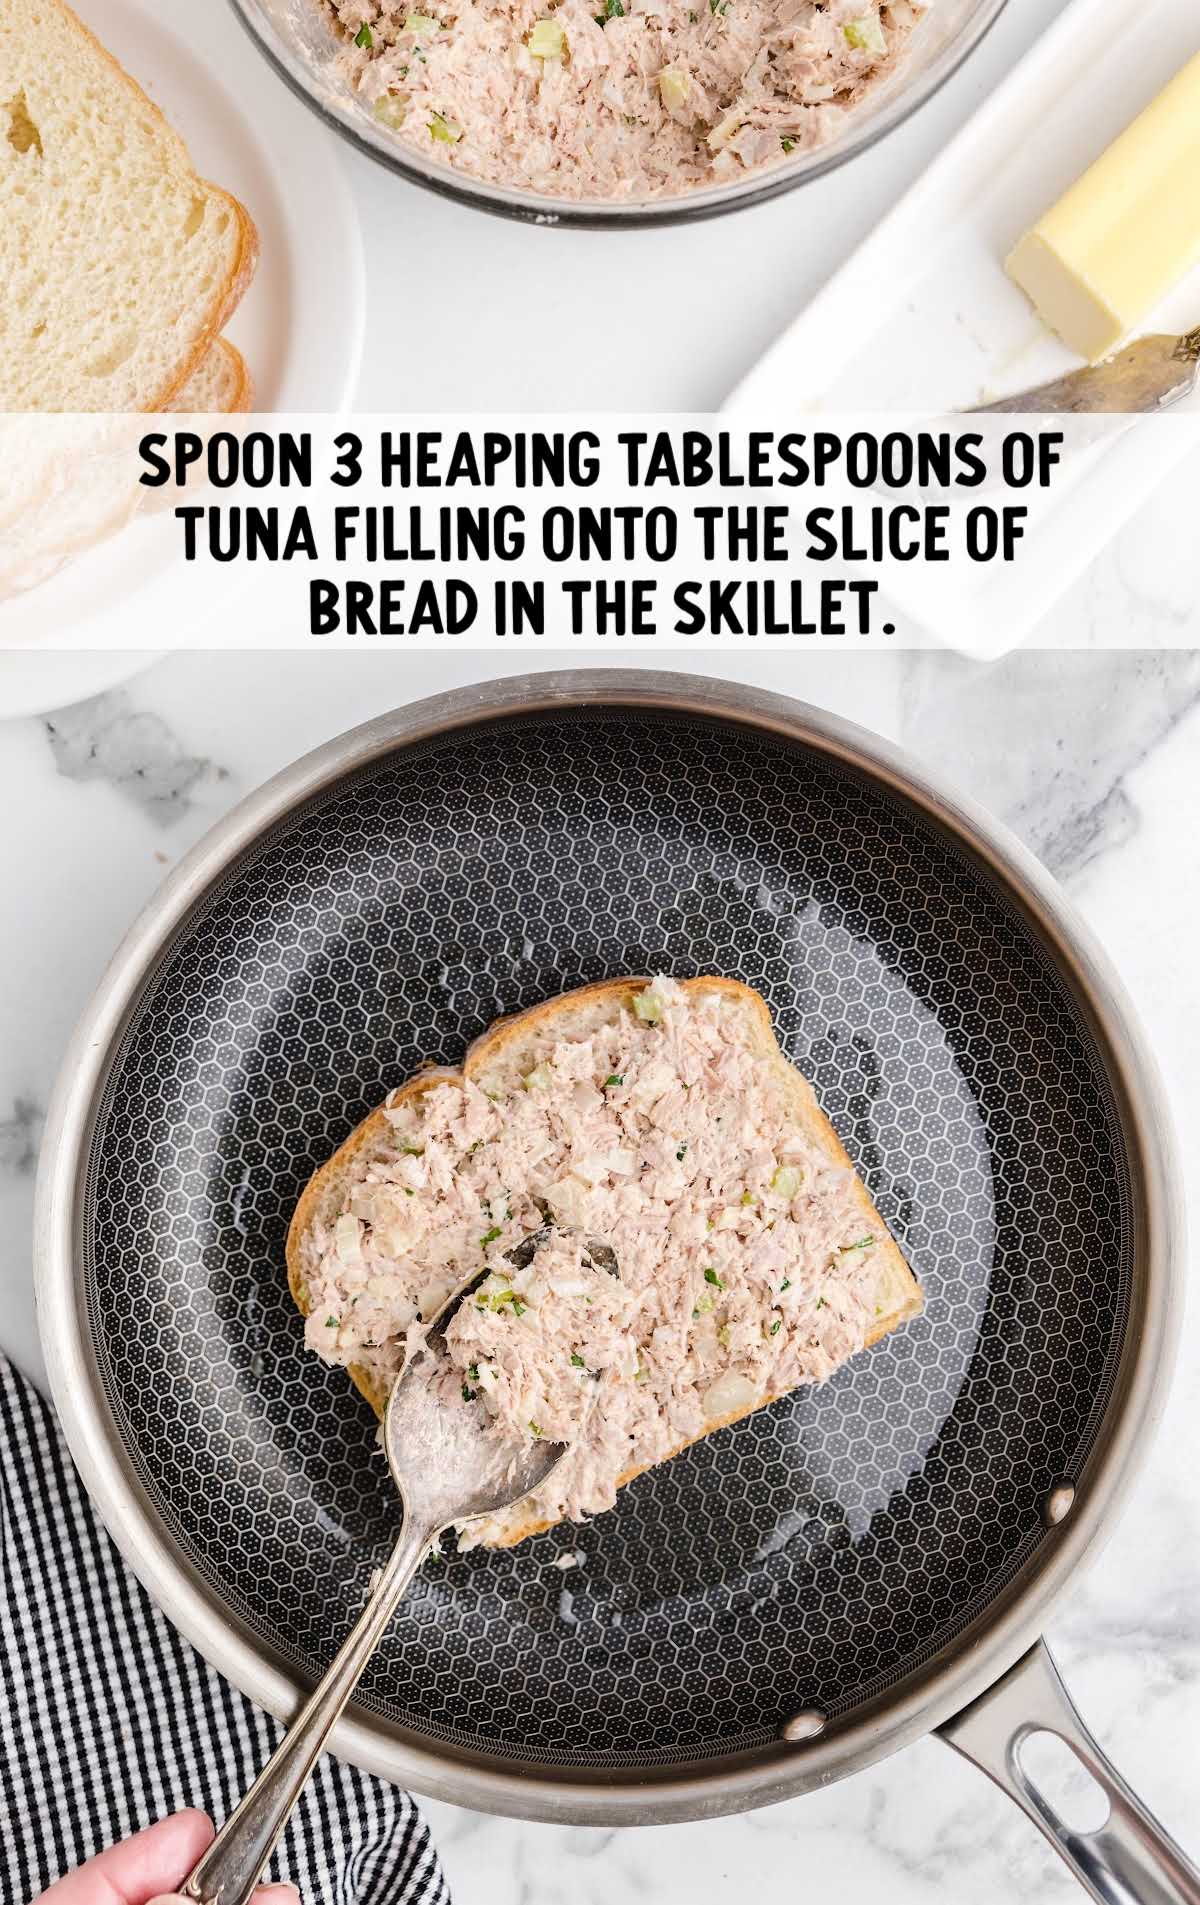 tuna mixture scooped over bread on the skillet